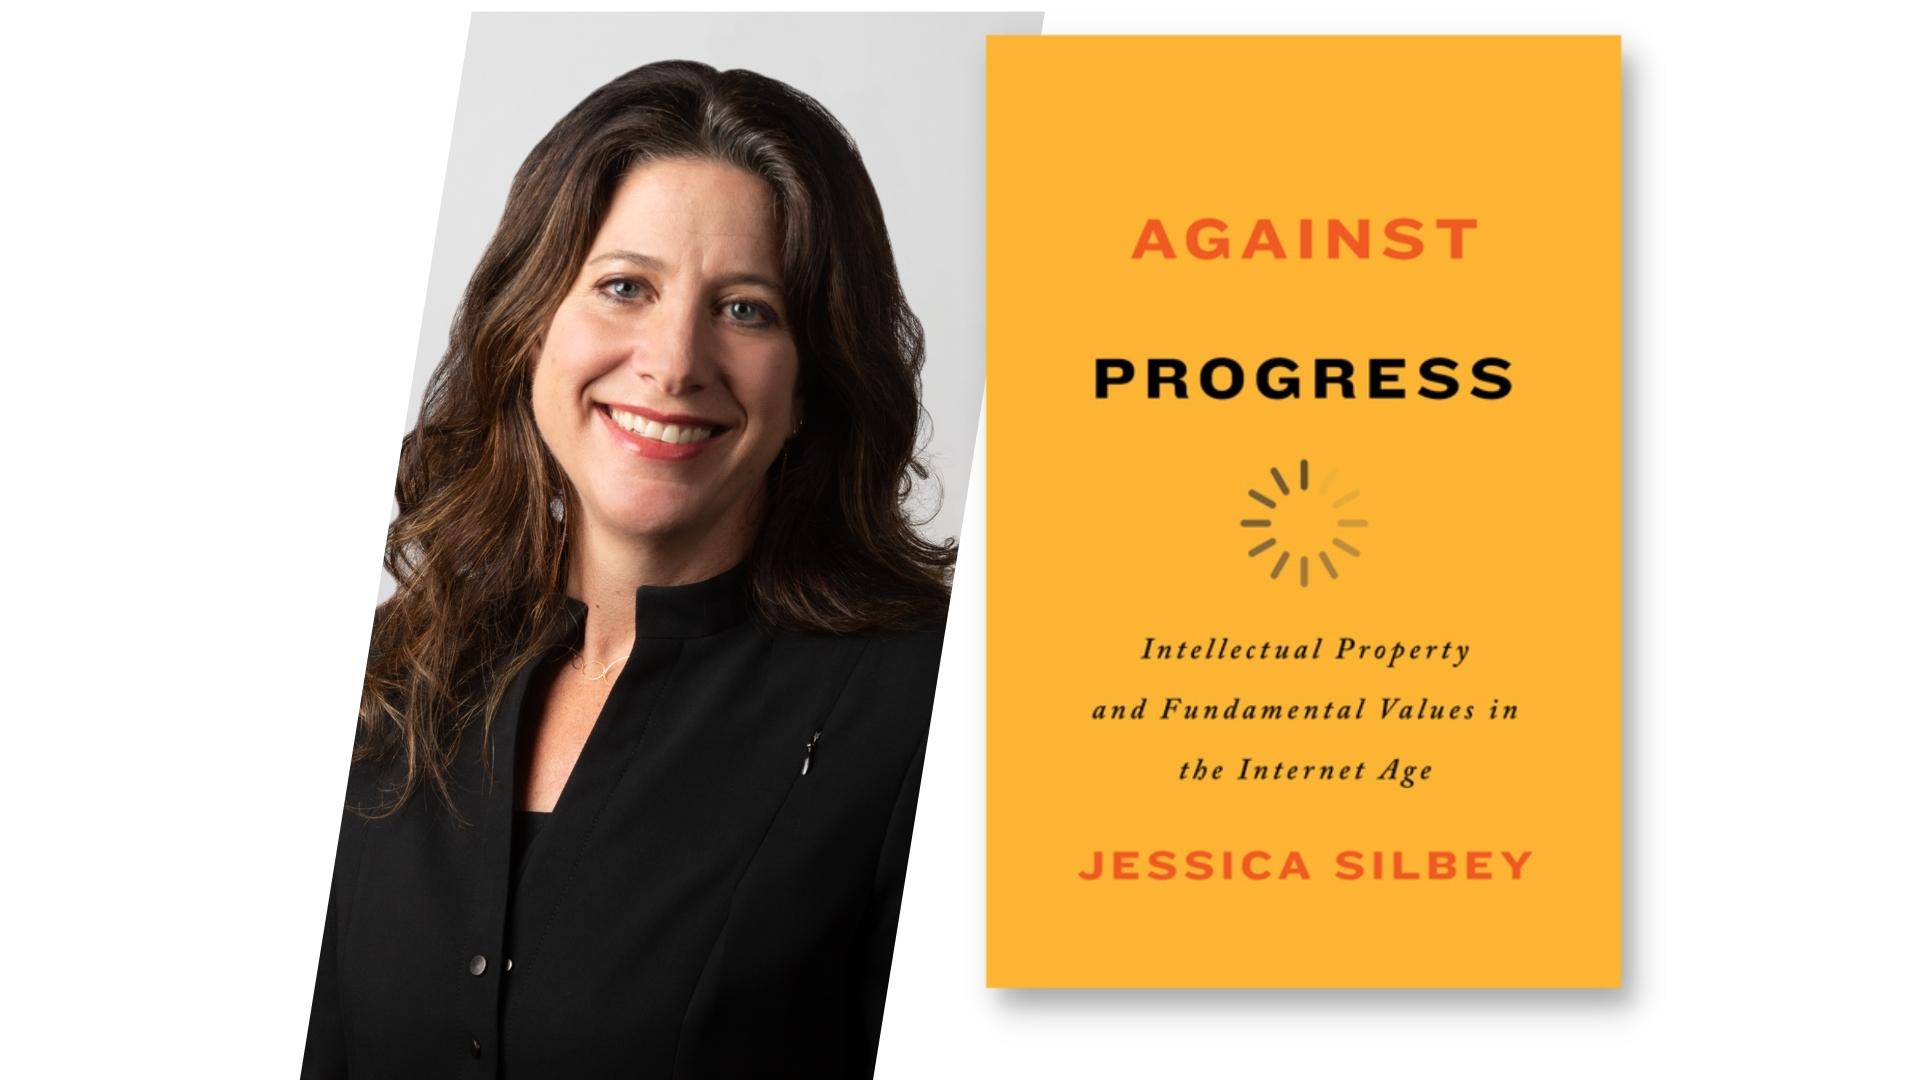 Headshot of Professor Jessica Silbey arranged next to her book cover, "Against Progress"